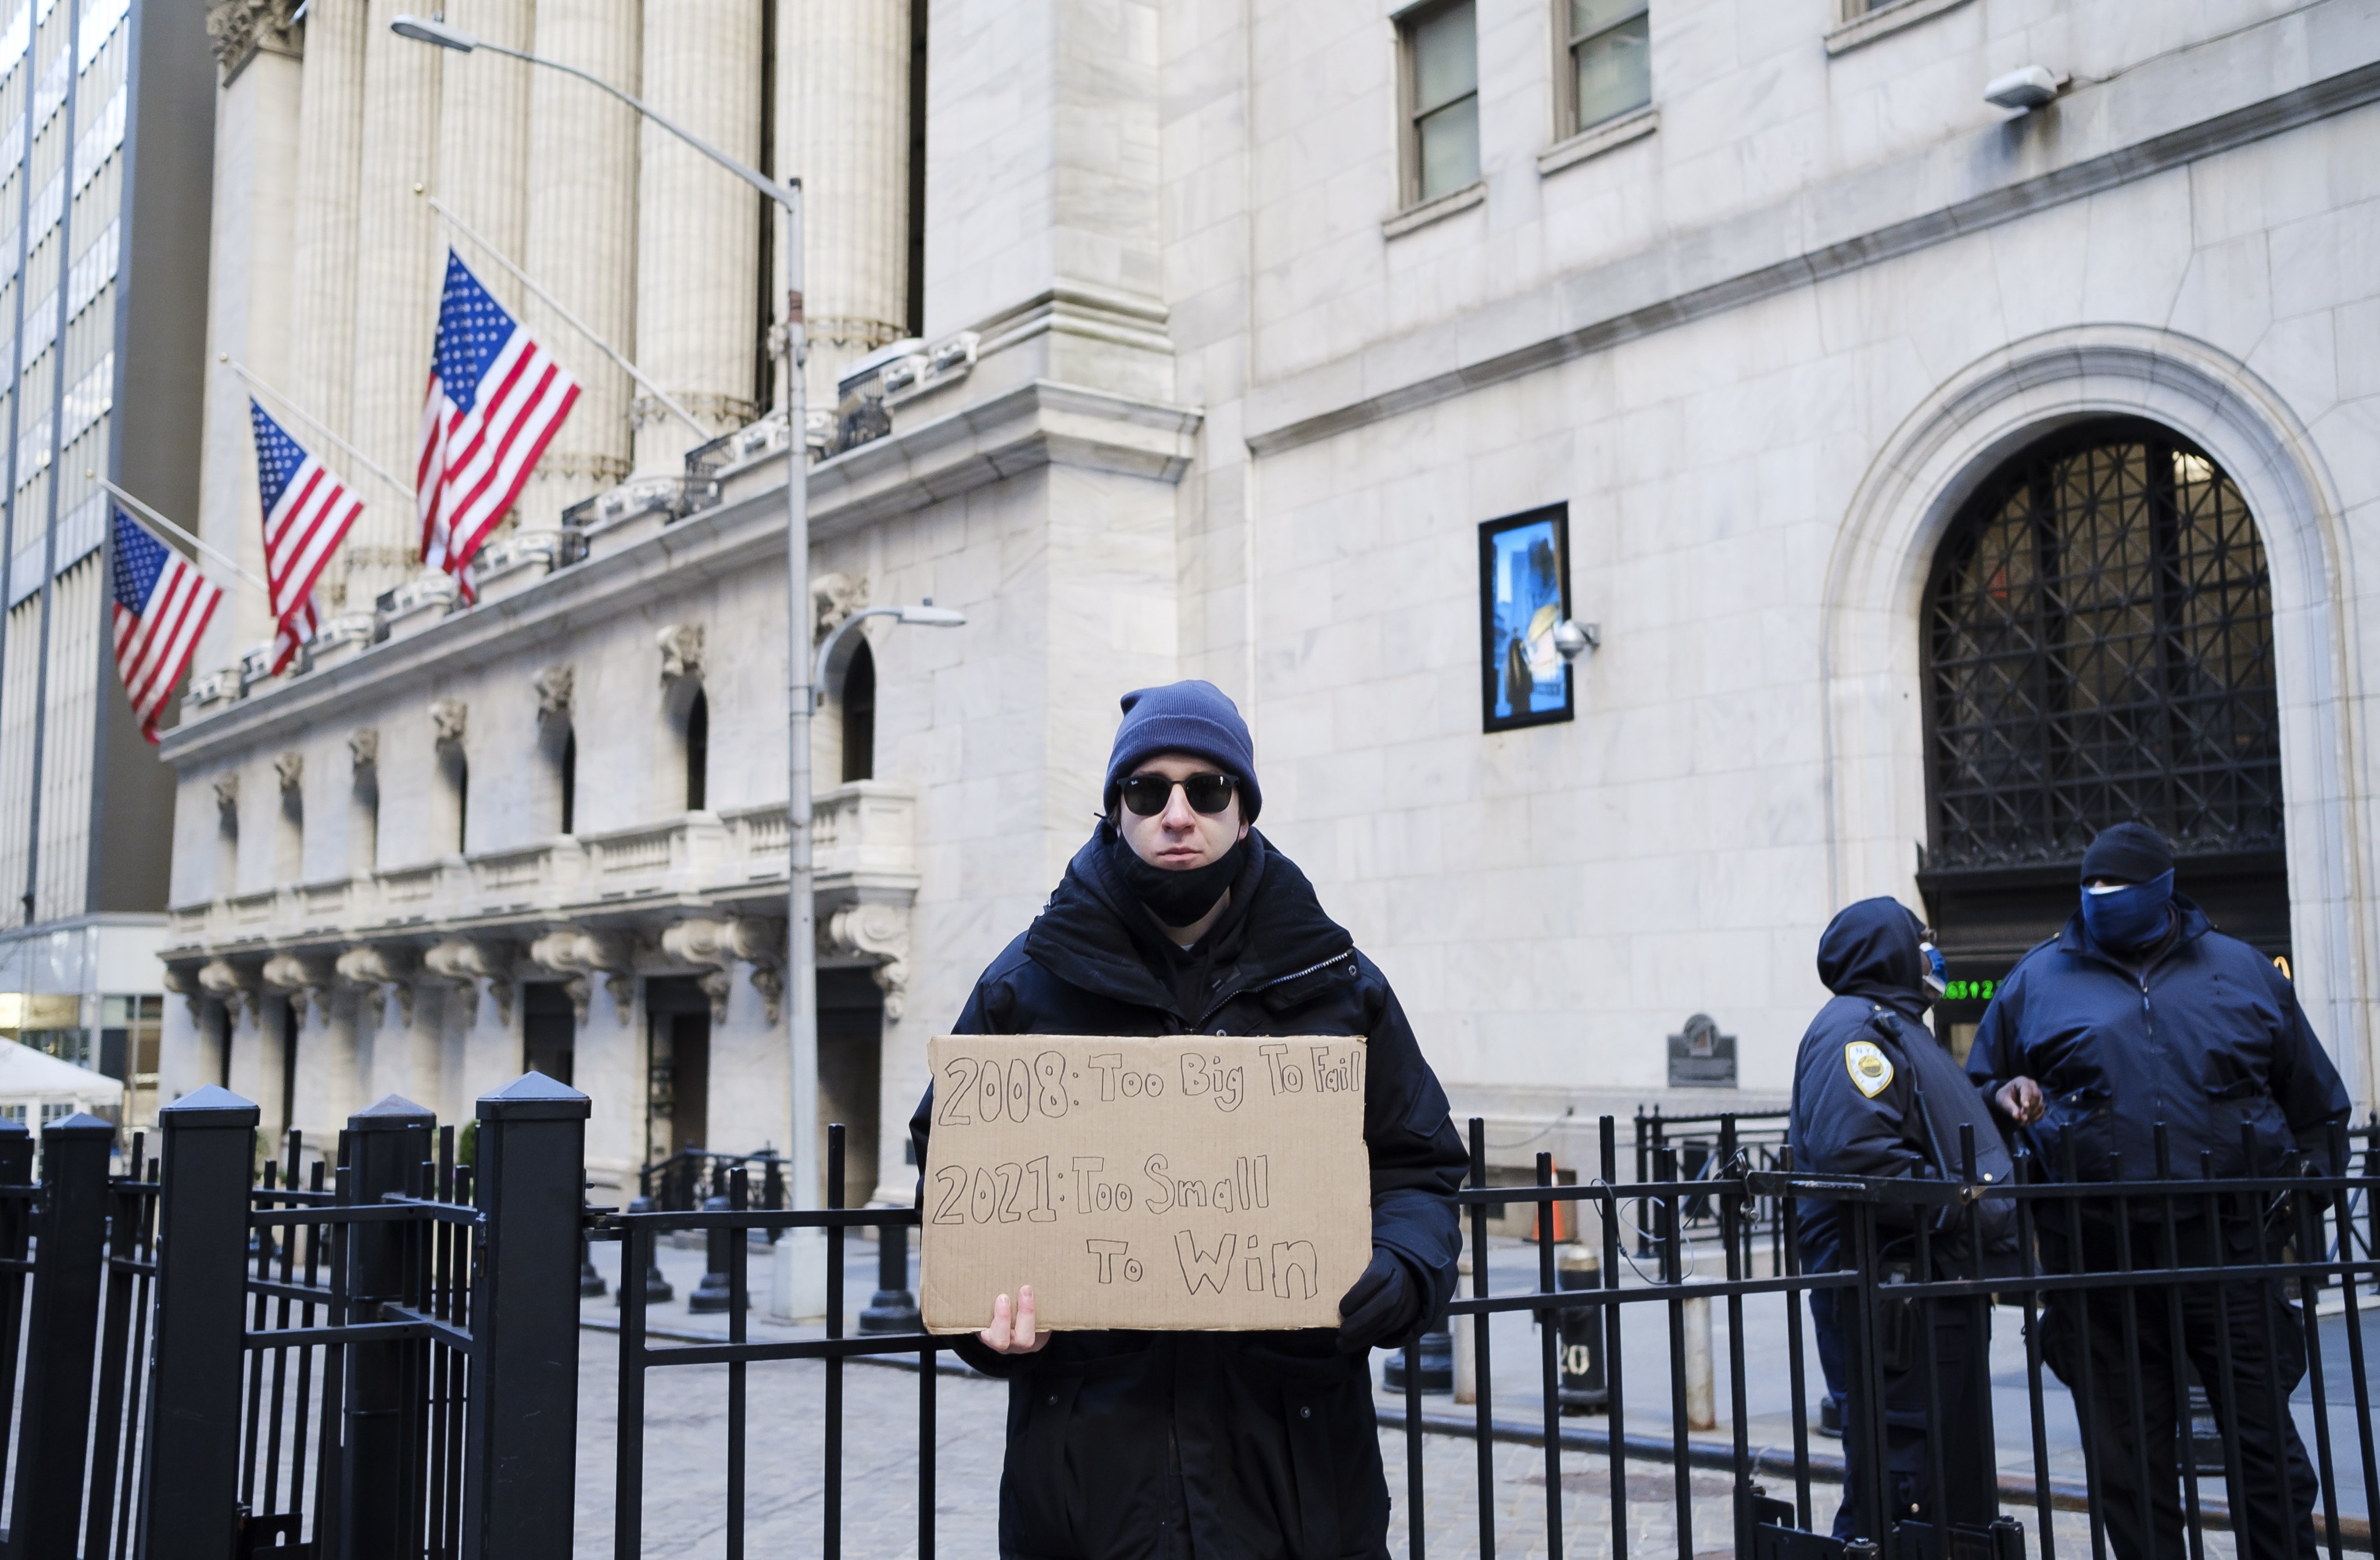 An activist stands in front of the New York Stock Exchange as part of a protest calling for an increase in the capital gains tax in New York, on January 28, 2021. Photo: EPA-EFE